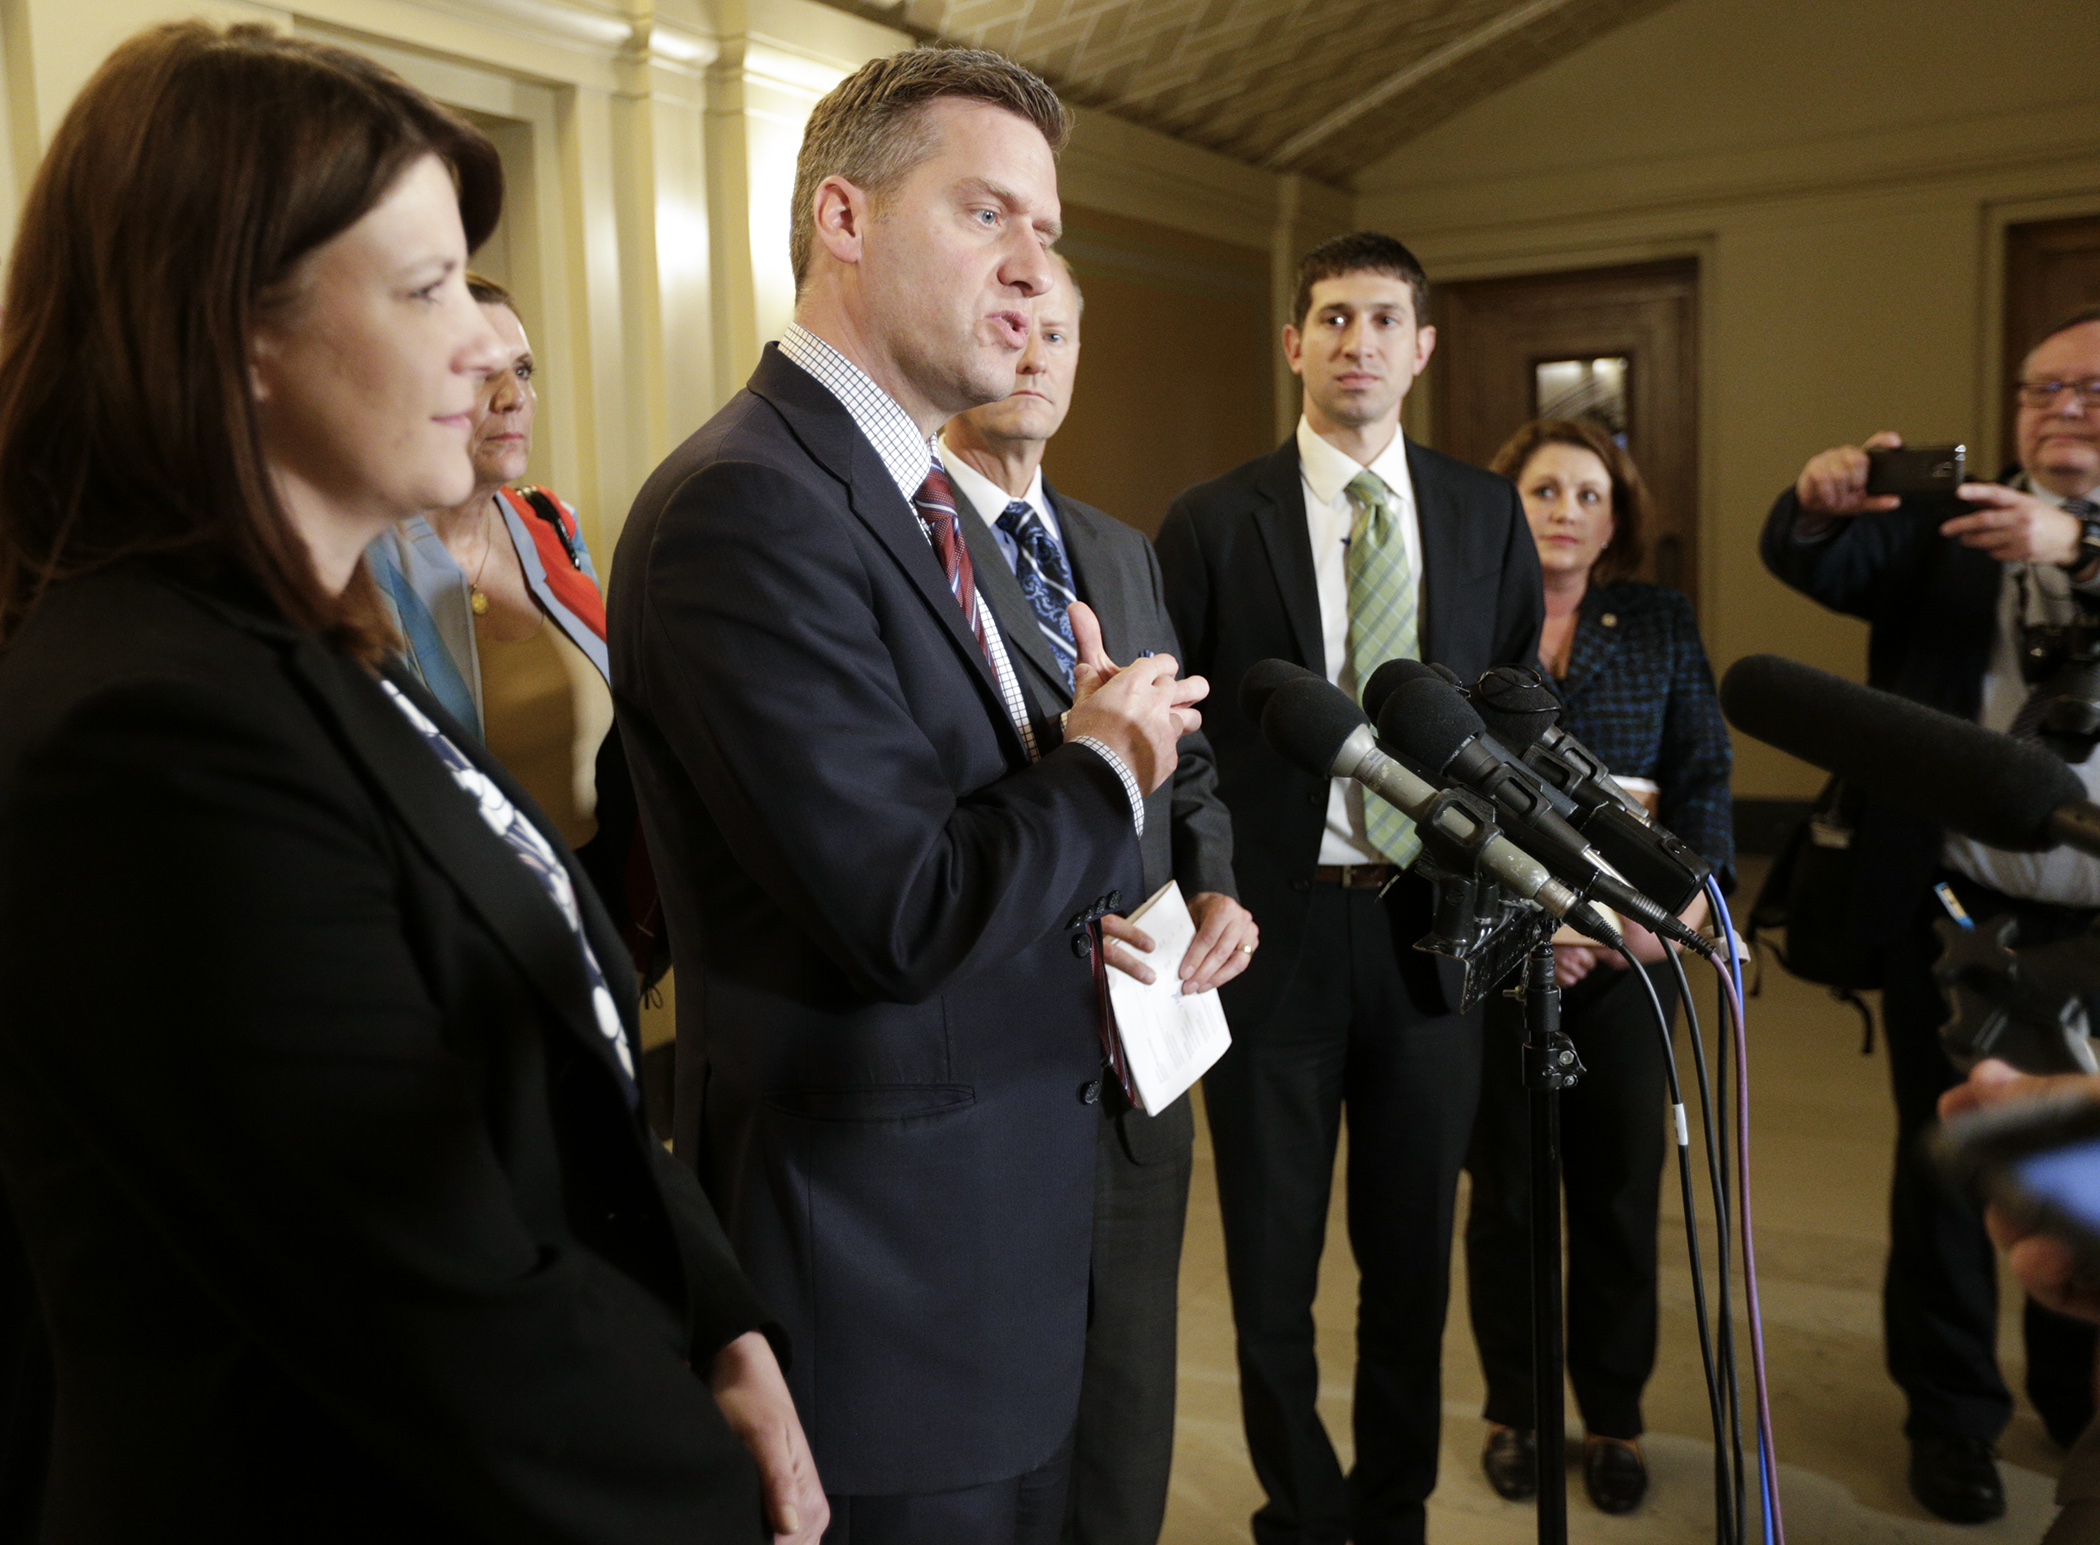 House Speaker Kurt Daudt comments to the press after receiving a counter budget offer from Gov. Mark Dayton at their afternoon meeting saying the GOP leaders would now have to decide how they want to proceed. Photo by Paul Battaglia